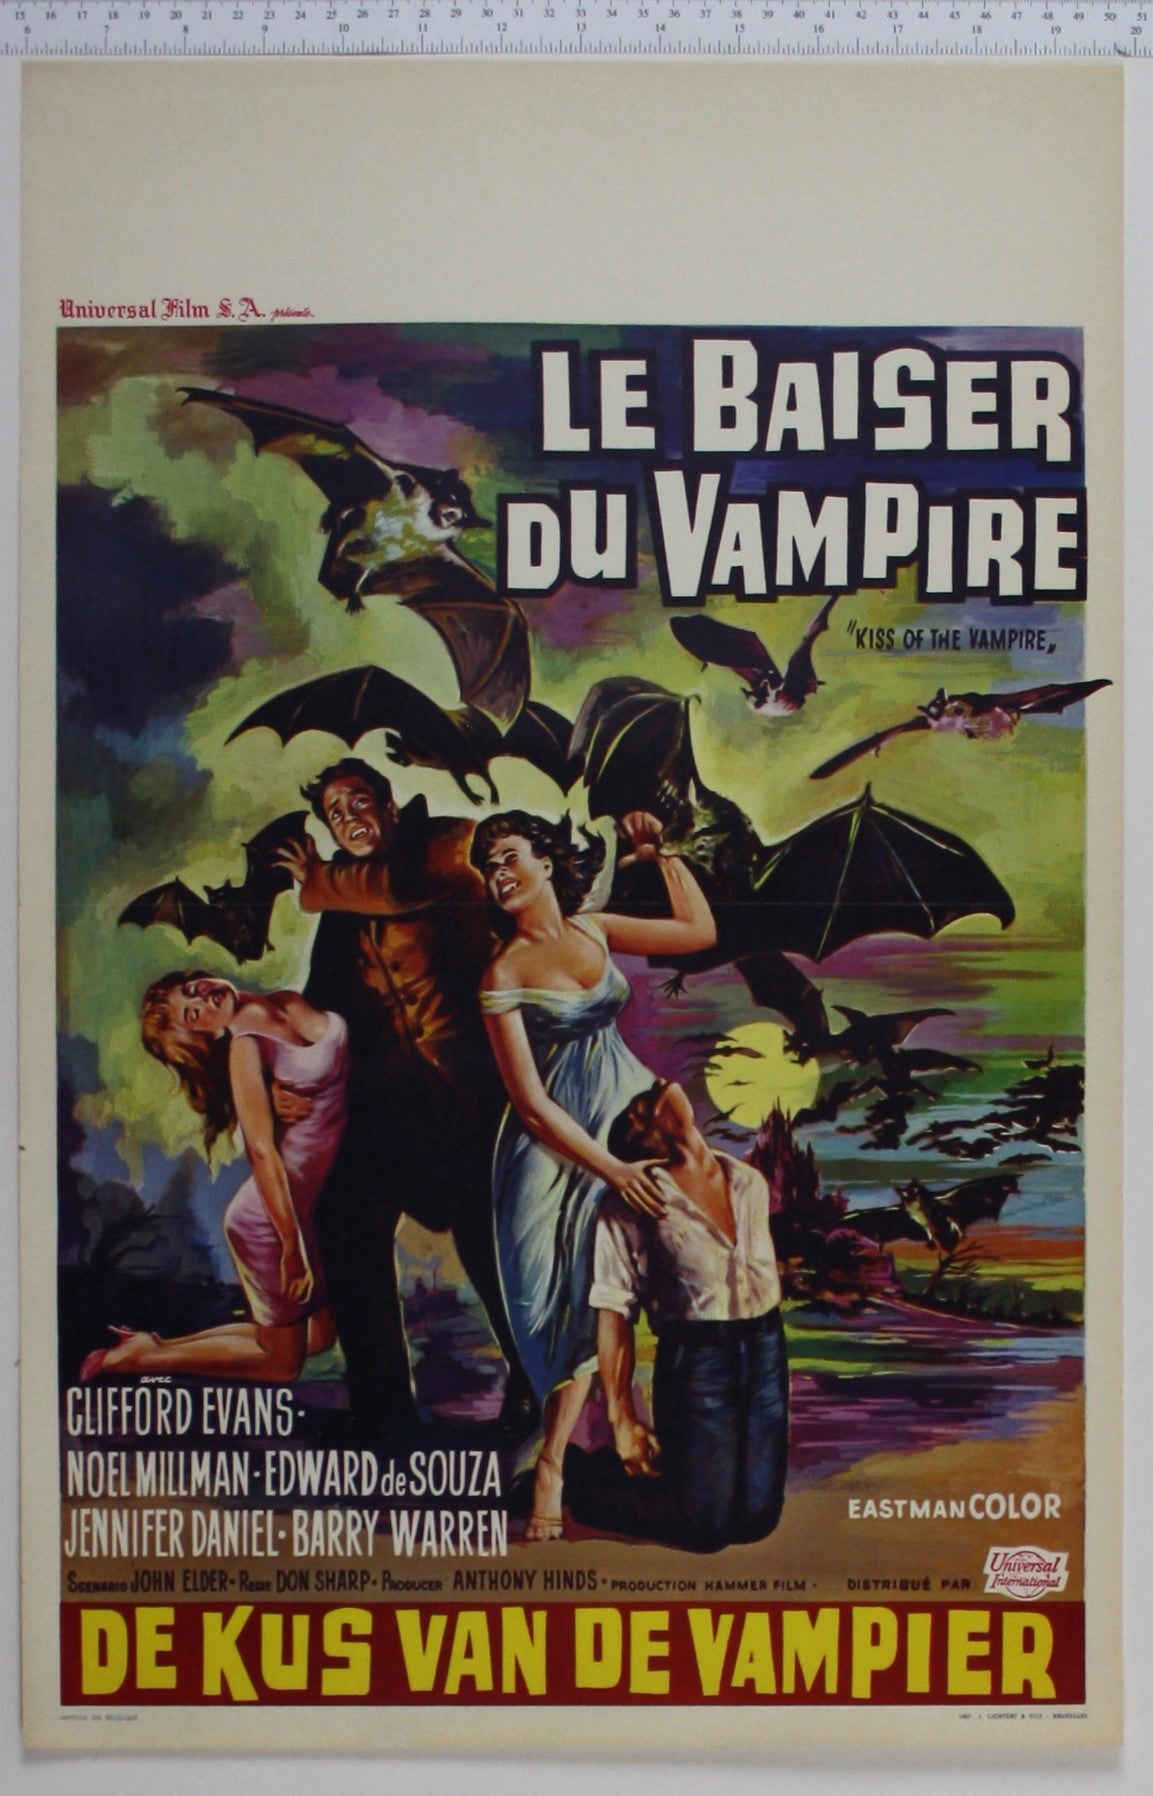 Artwork of bats flying over turbulent sky, under them, vampires holding victims are the ones being attacked.